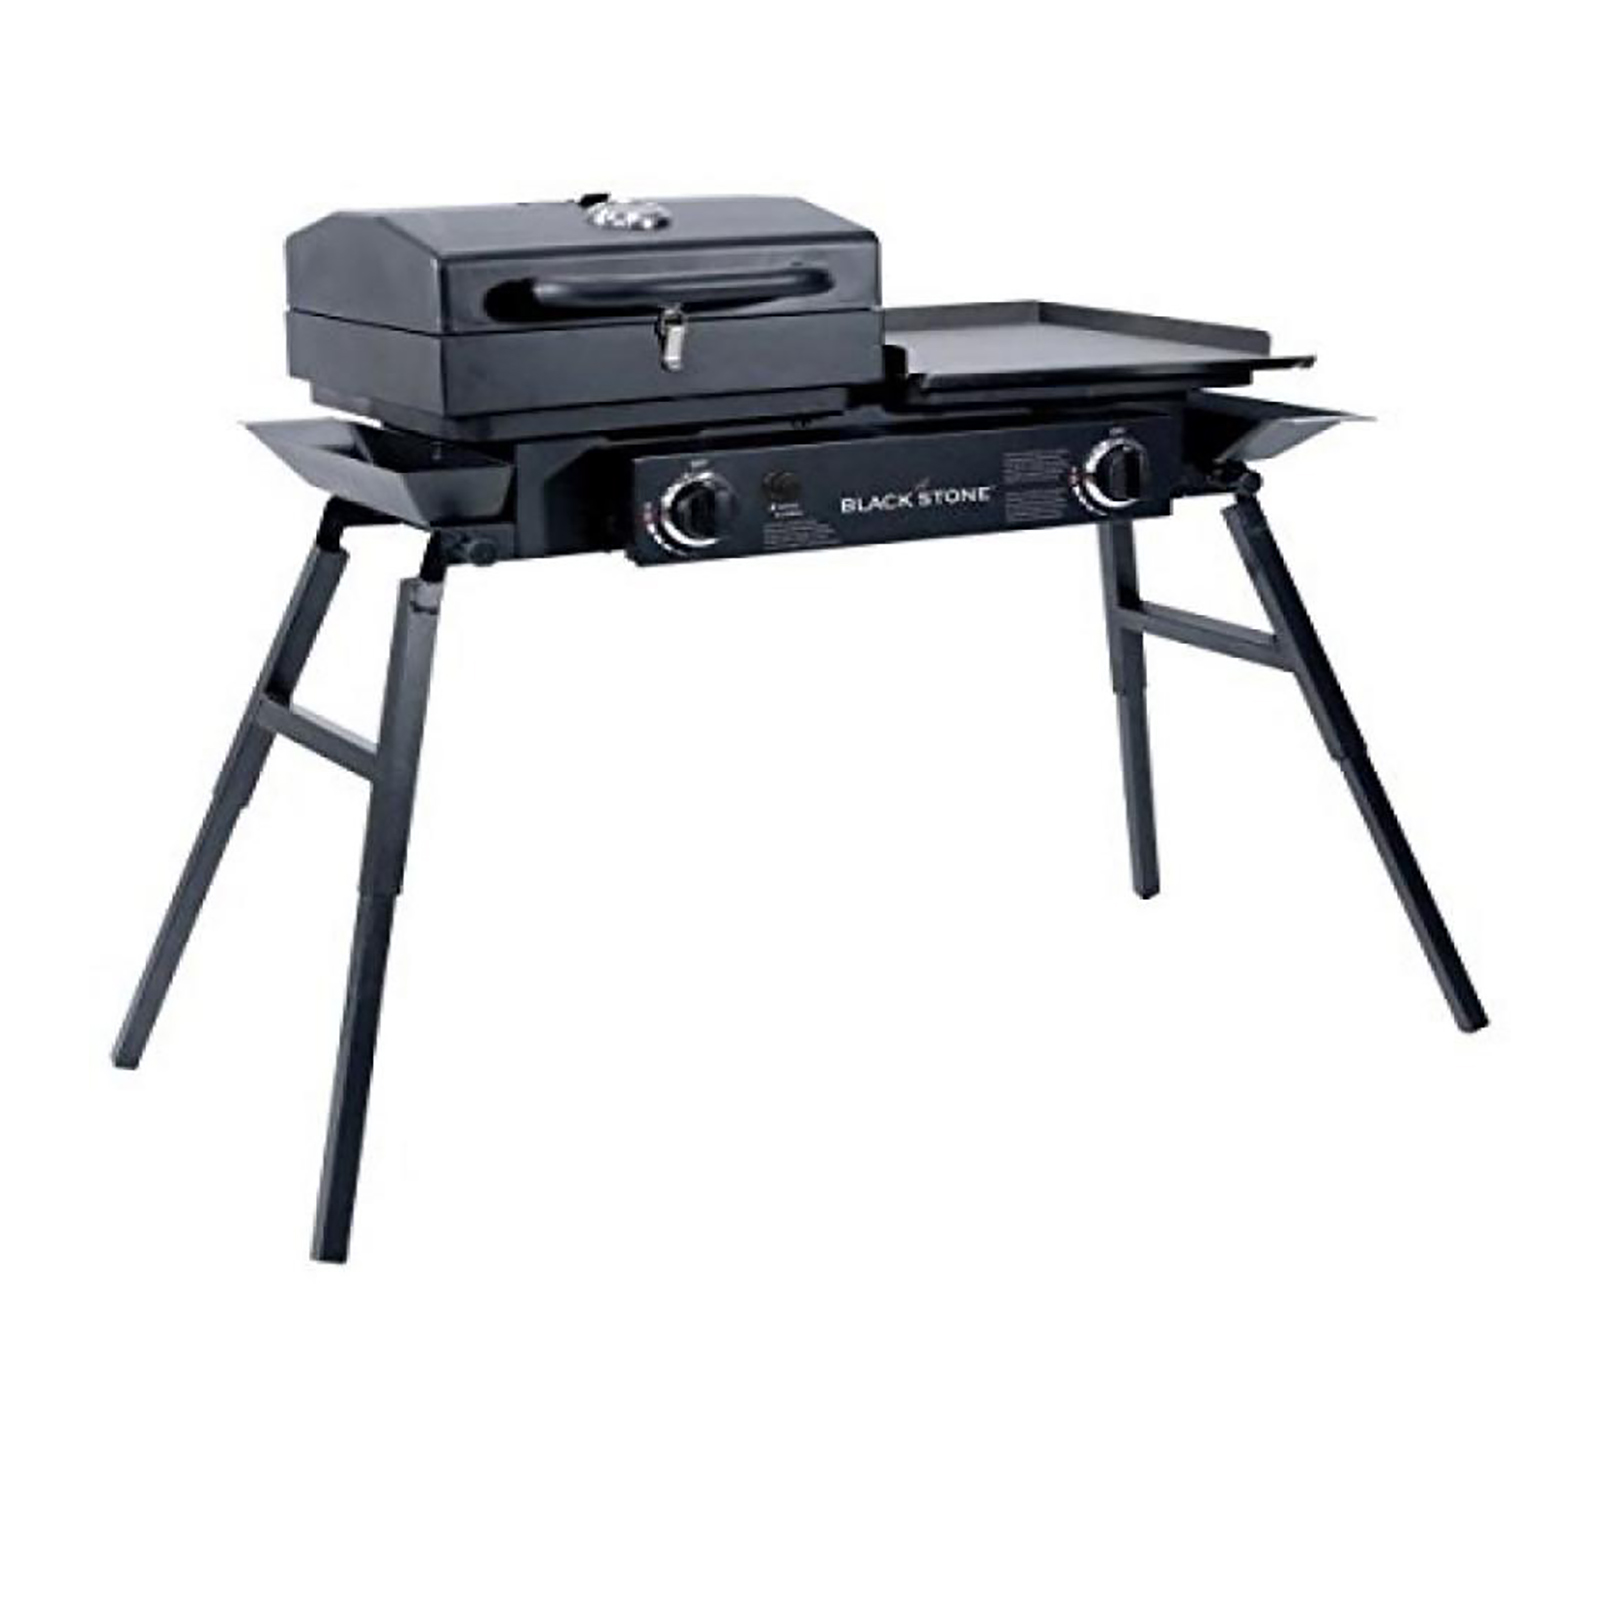 Blackstone 1555 Tailgater Combo Gas Grill and Griddle